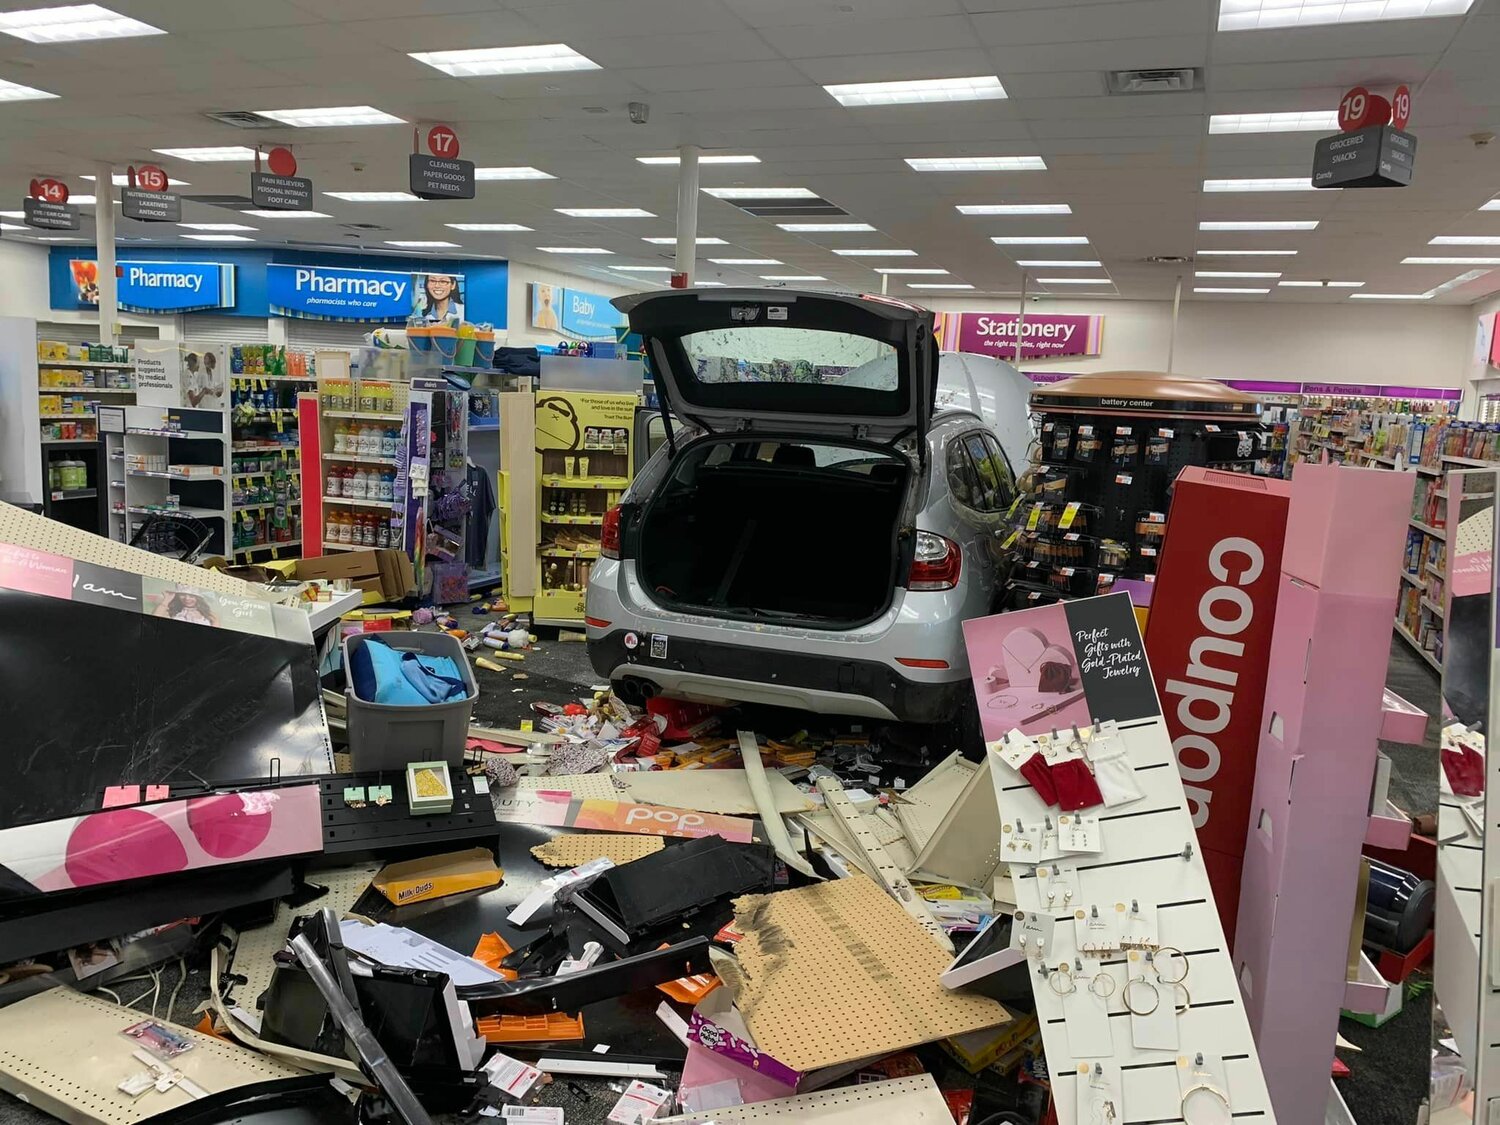 A vehicle crashed into the CVS on Cherry Street in Lambertville, N.J., Saturday.